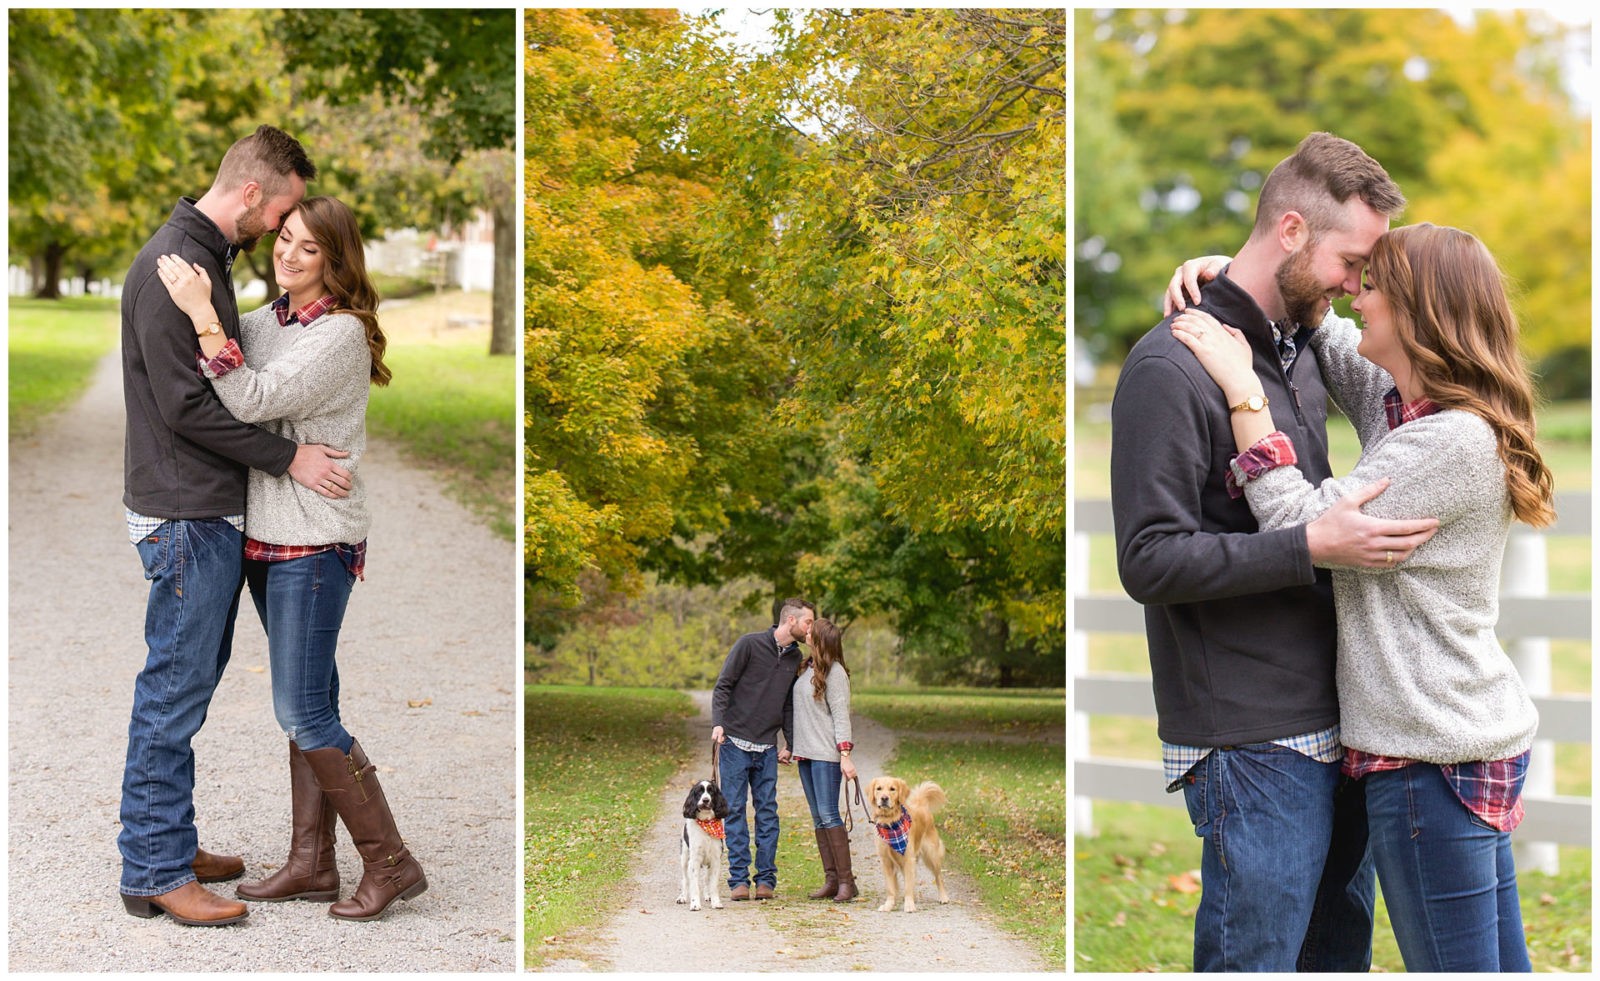 Fall outdoor engagement session with dogs at Shaker Village in Harrodsburg, Kentucky.